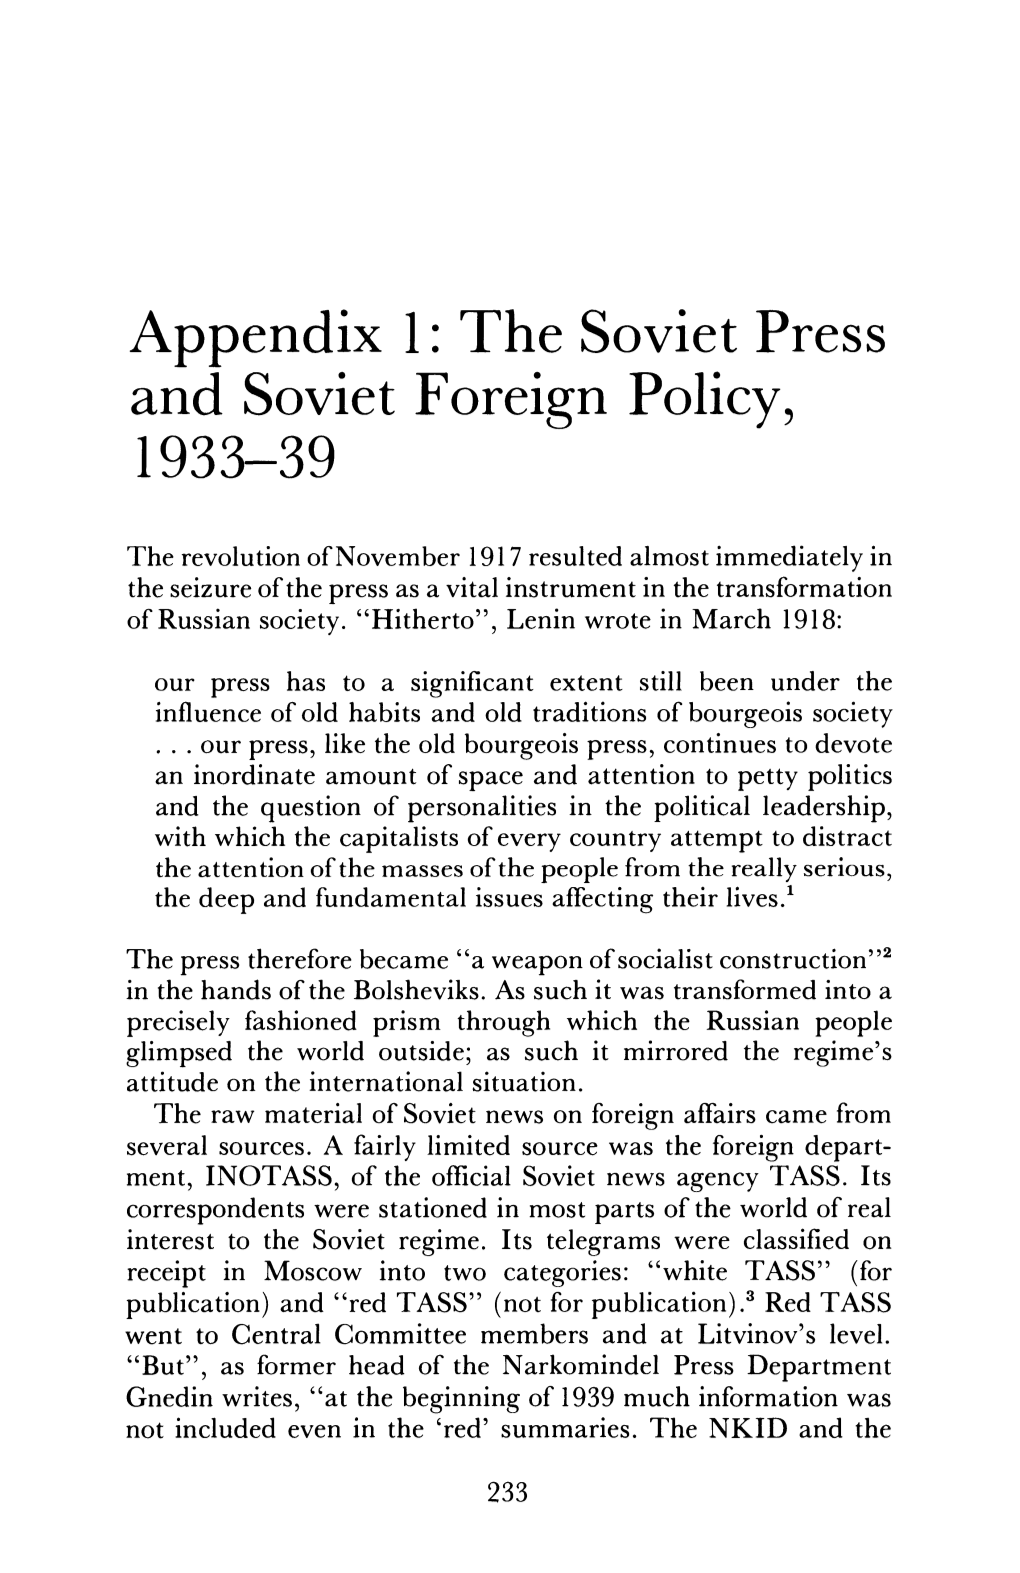 Appendix 1: the Soviet Press and Soviet Foreign Policy, 1933-39